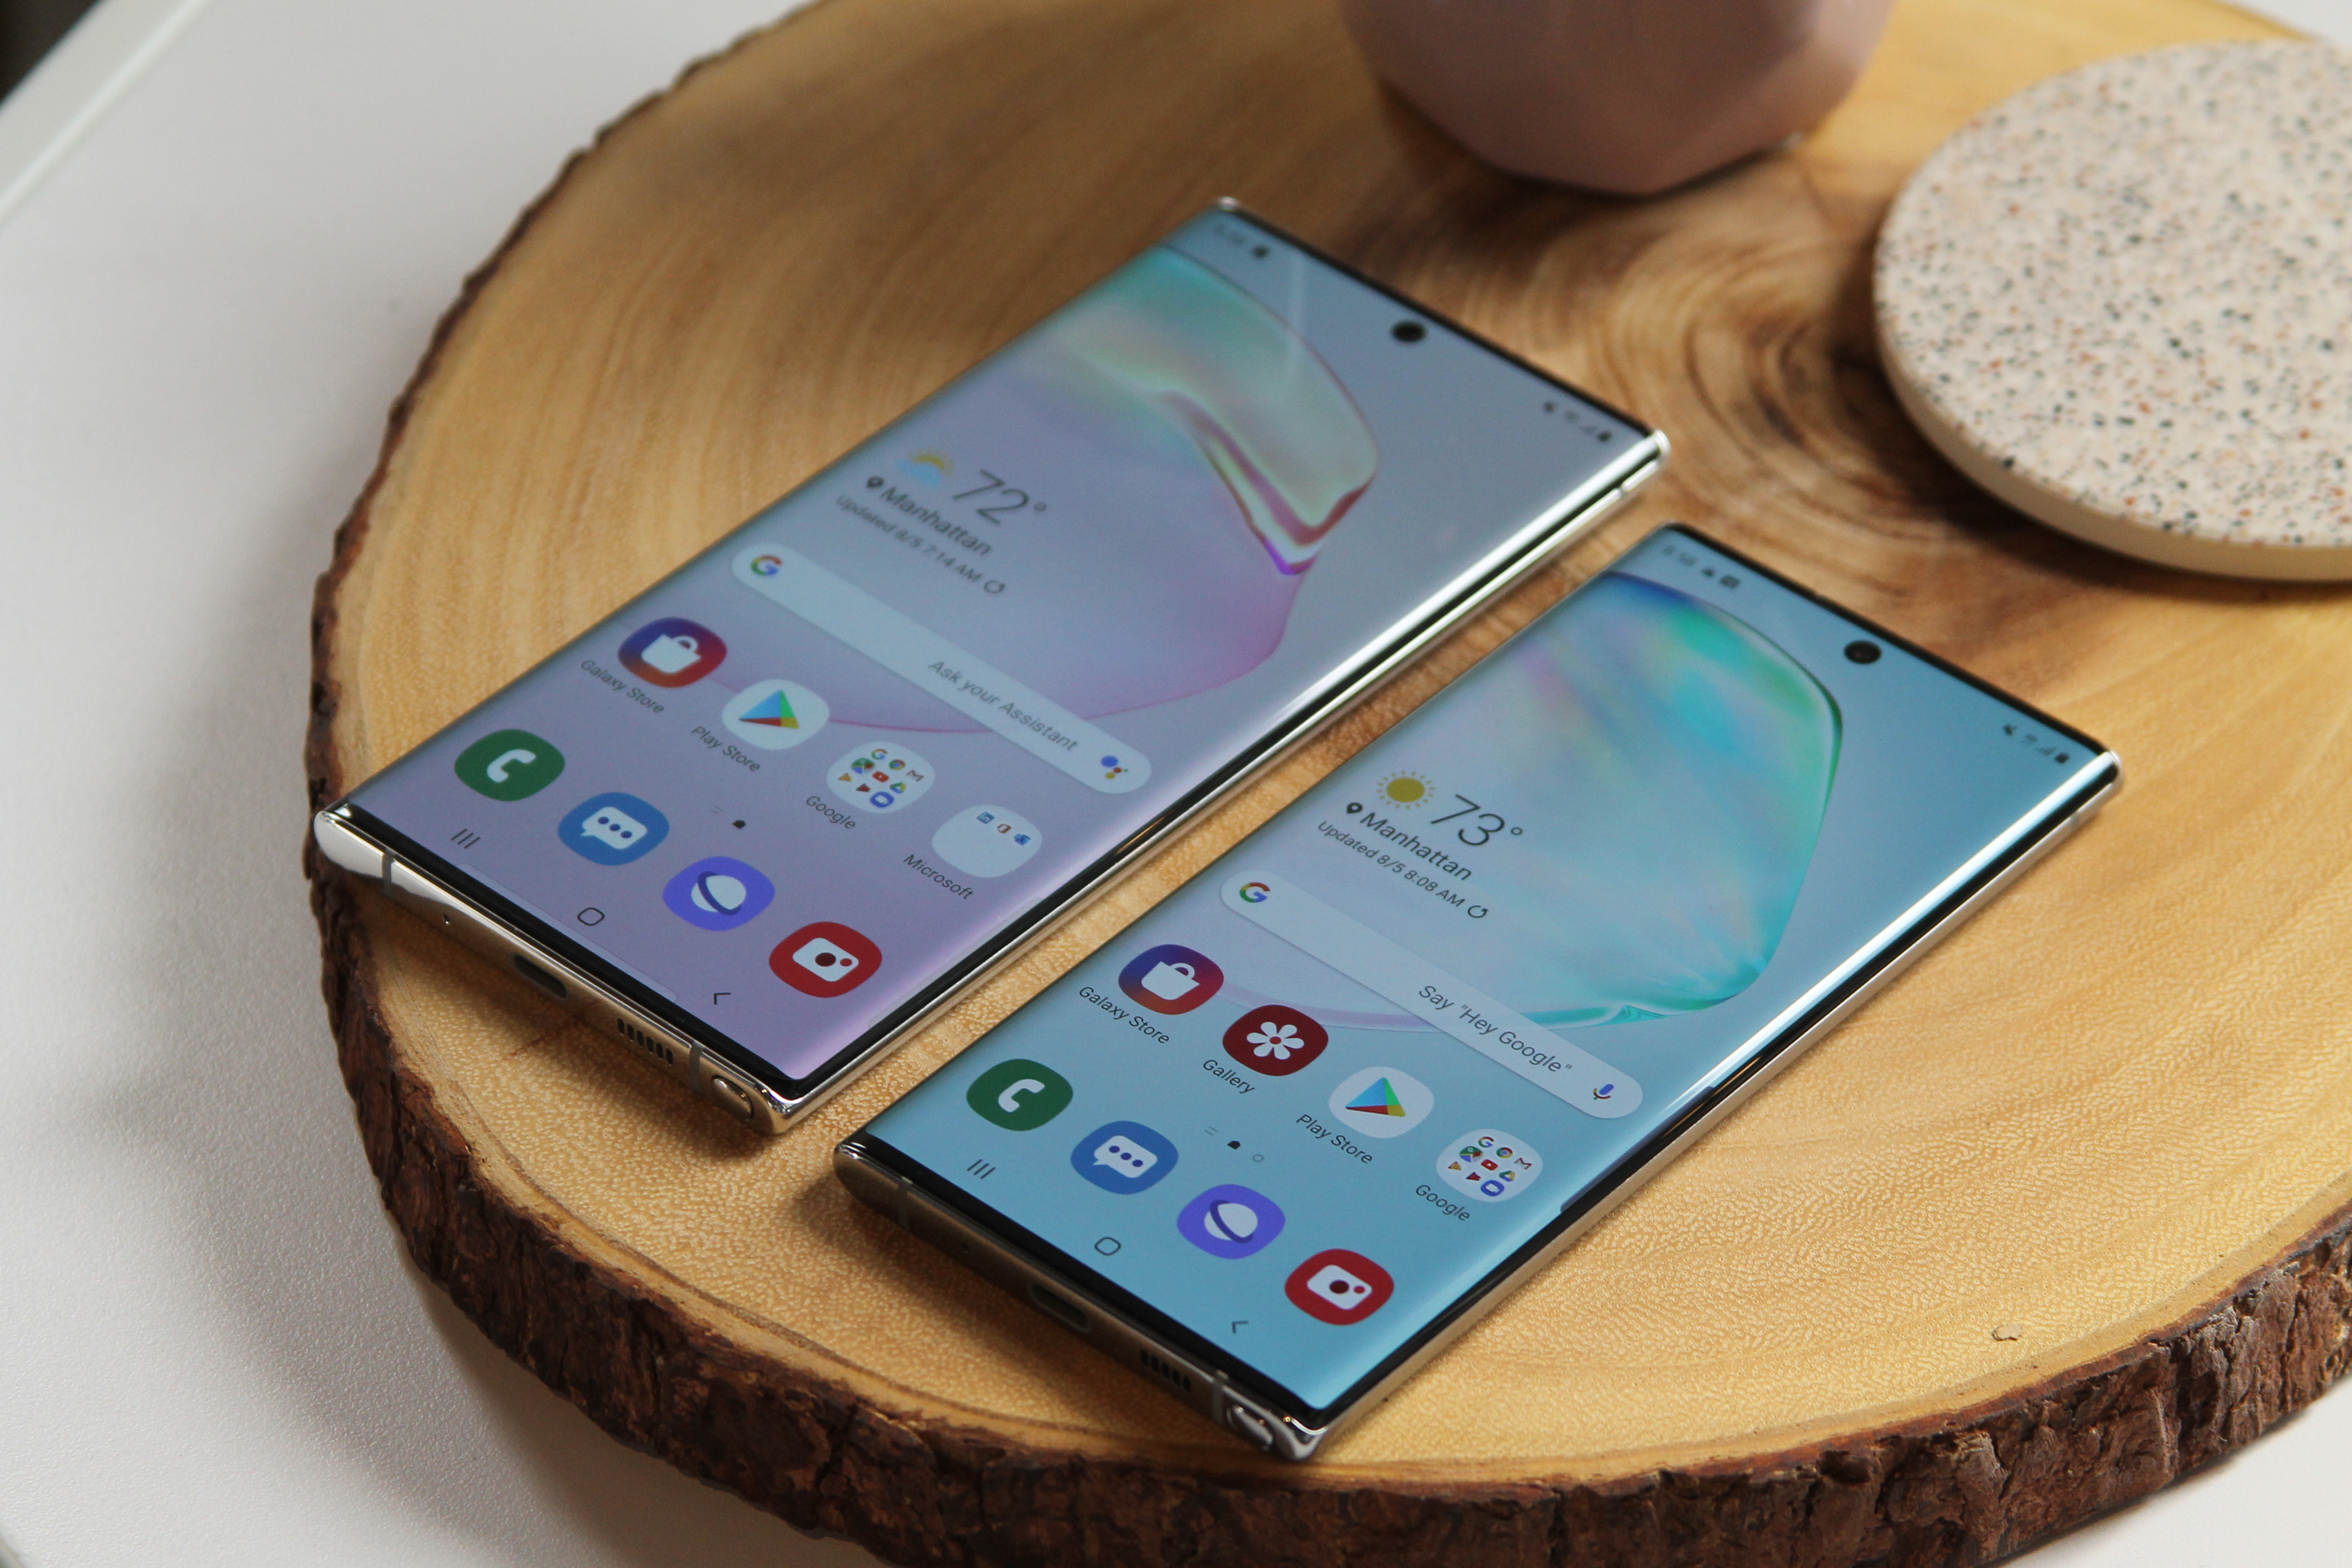 Samsung Galaxy Note 10 vs. Note 10 Plus: Which One Should You Buy